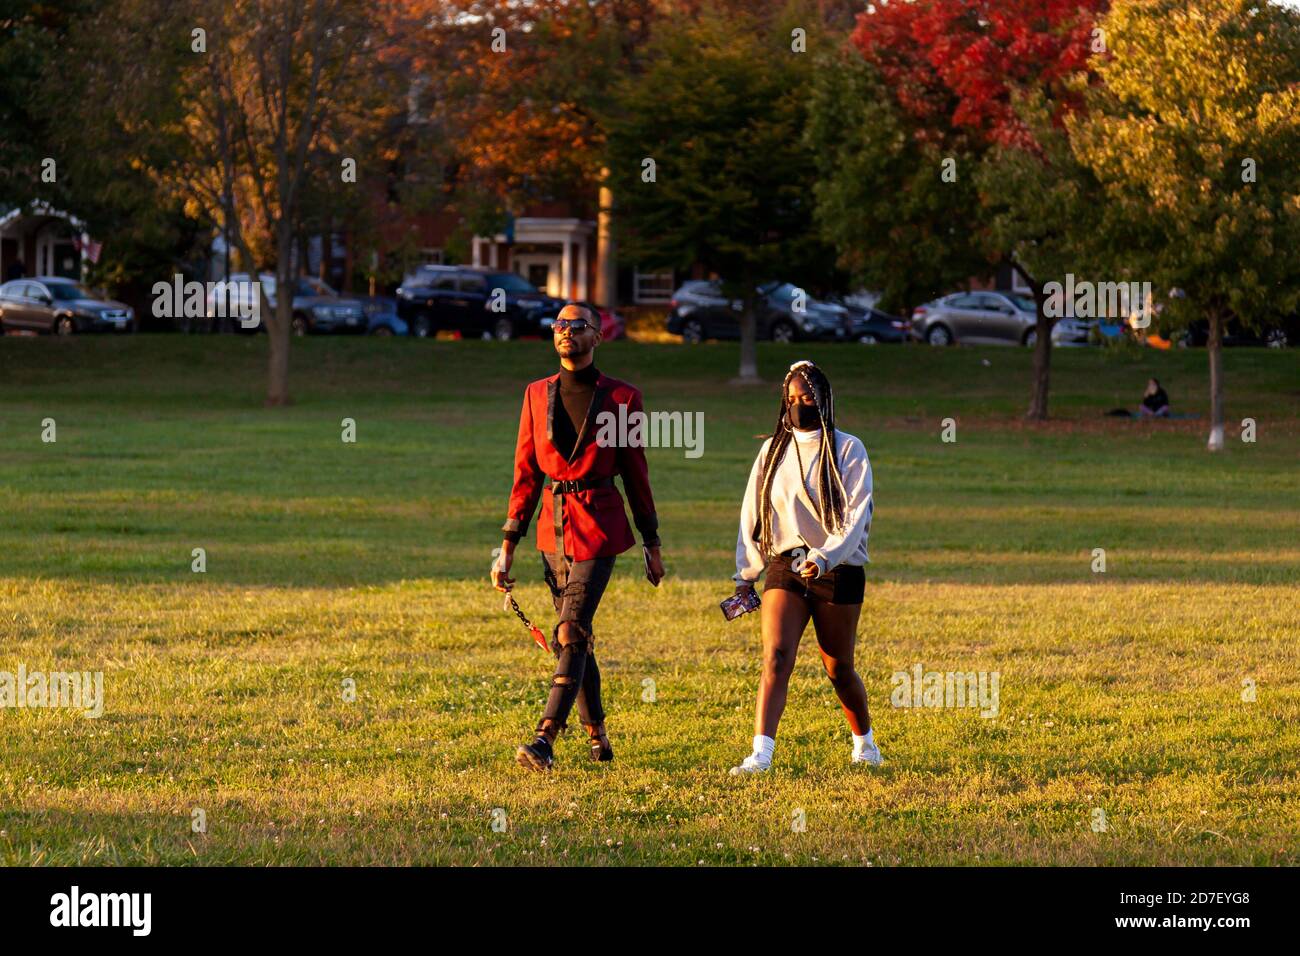 Frederick, MD, USA 10/14/2020: A young African American couple wearing fashionable clothes is walking together in a park on a sunny autumn afternoon. Stock Photo